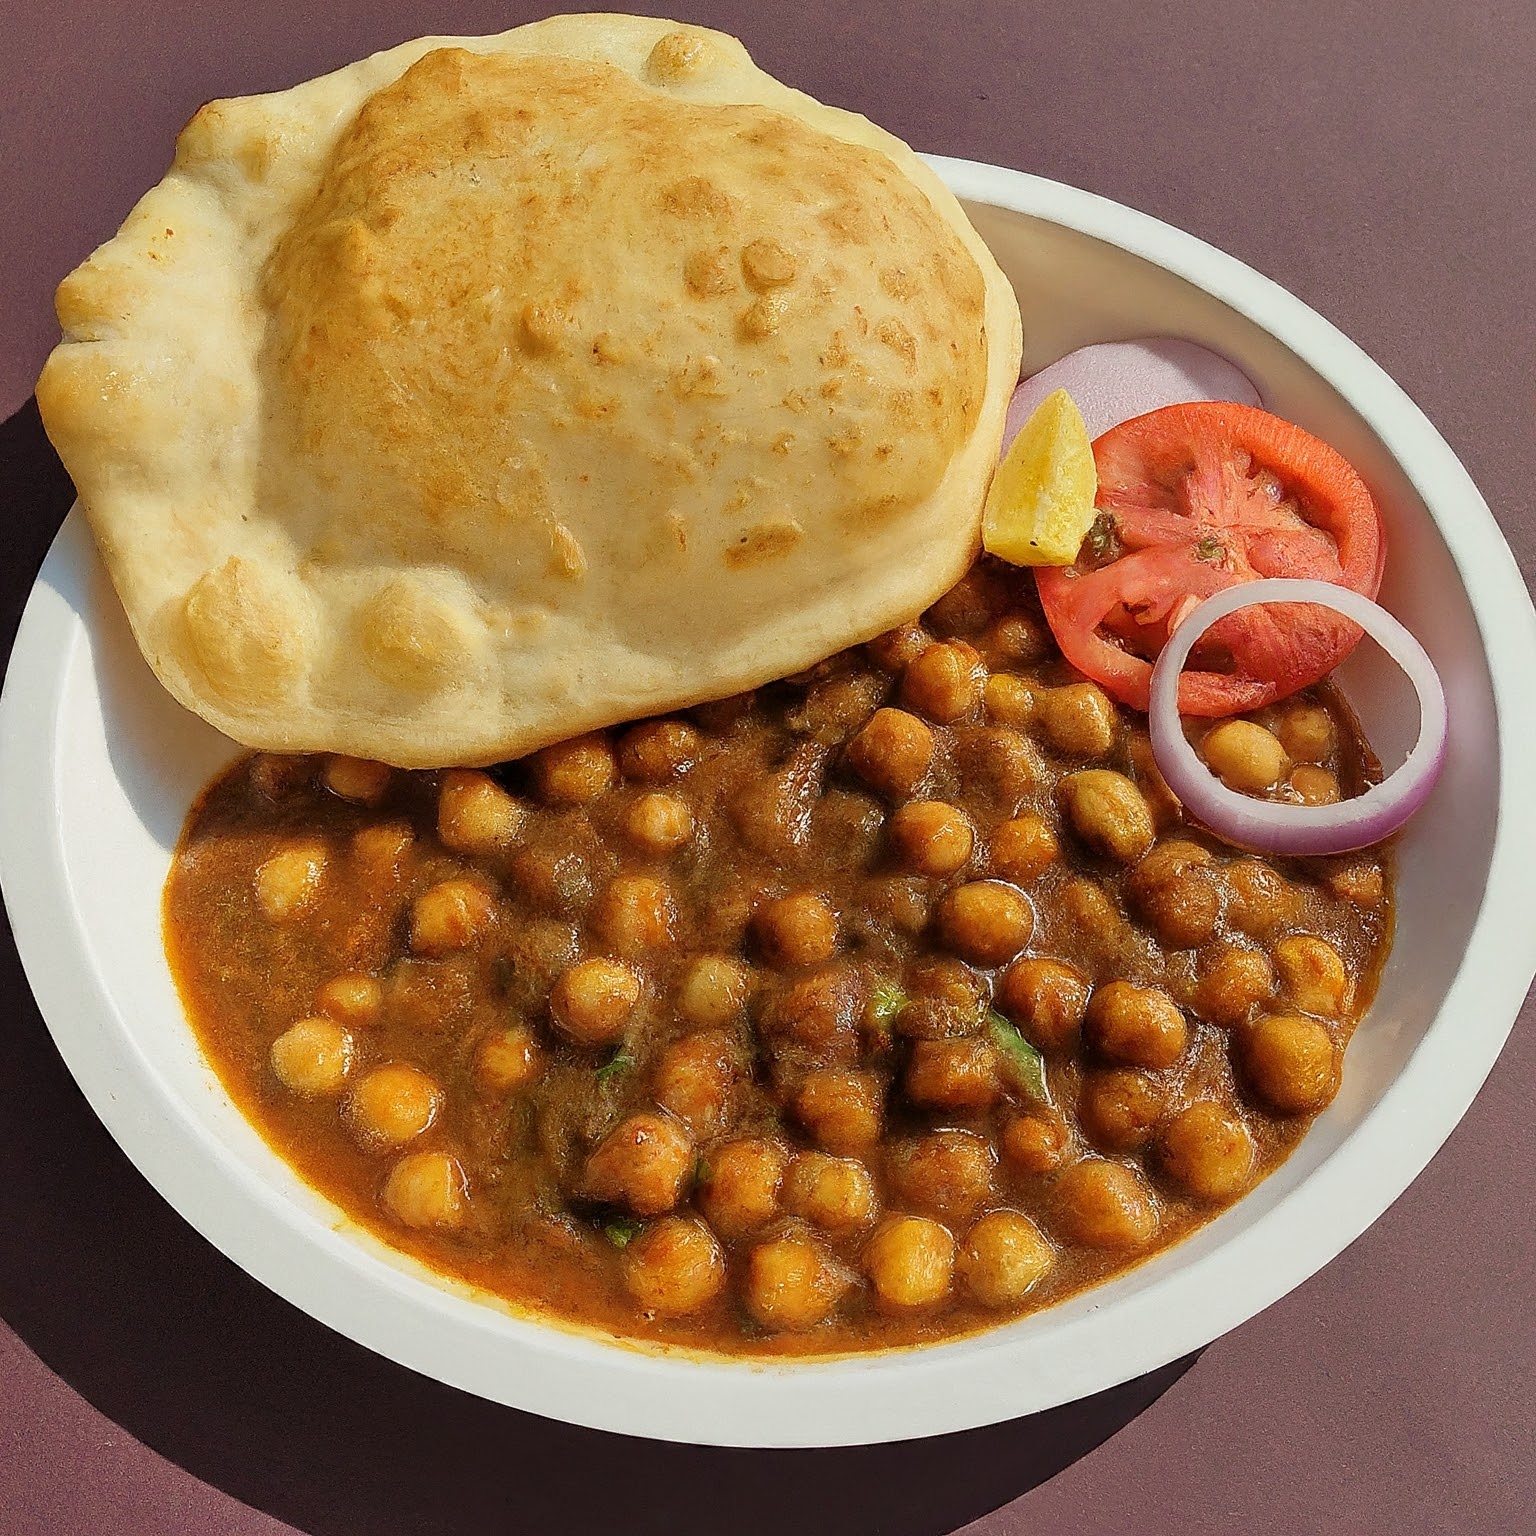 A plate of Chole Bhature with a bowl of red chickpea curry and a side of fluffy golden bhatura bread.